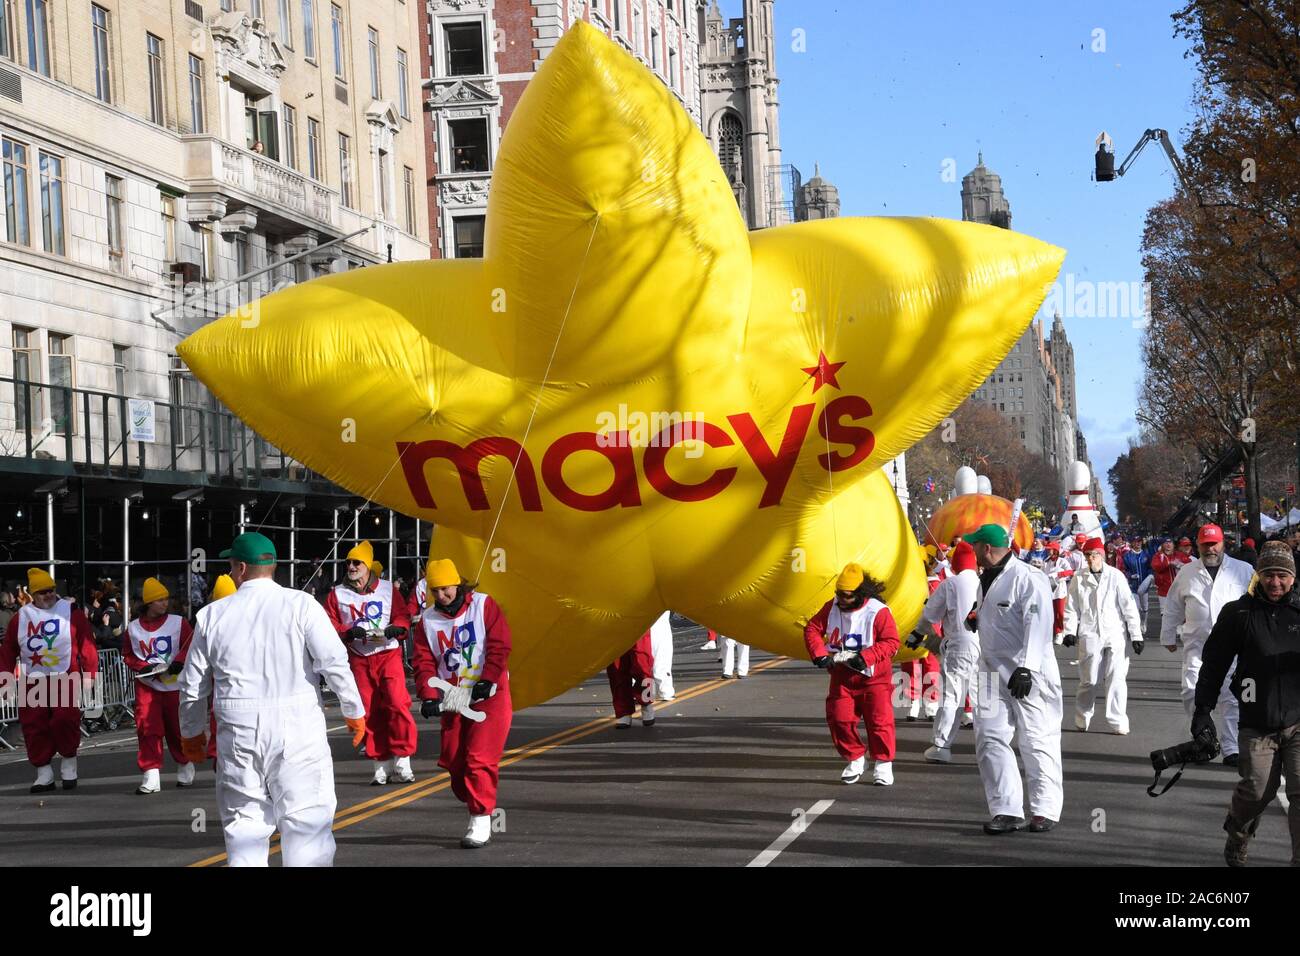 NEW YORK, NY - NOVEMBER 28: Handlers struggle to keep Yellow Macy's star balloon low because of high wind at the 93rd Annual Macy's Thanksgiving Day Parade on November 28, 2019 in New York City. Stock Photo